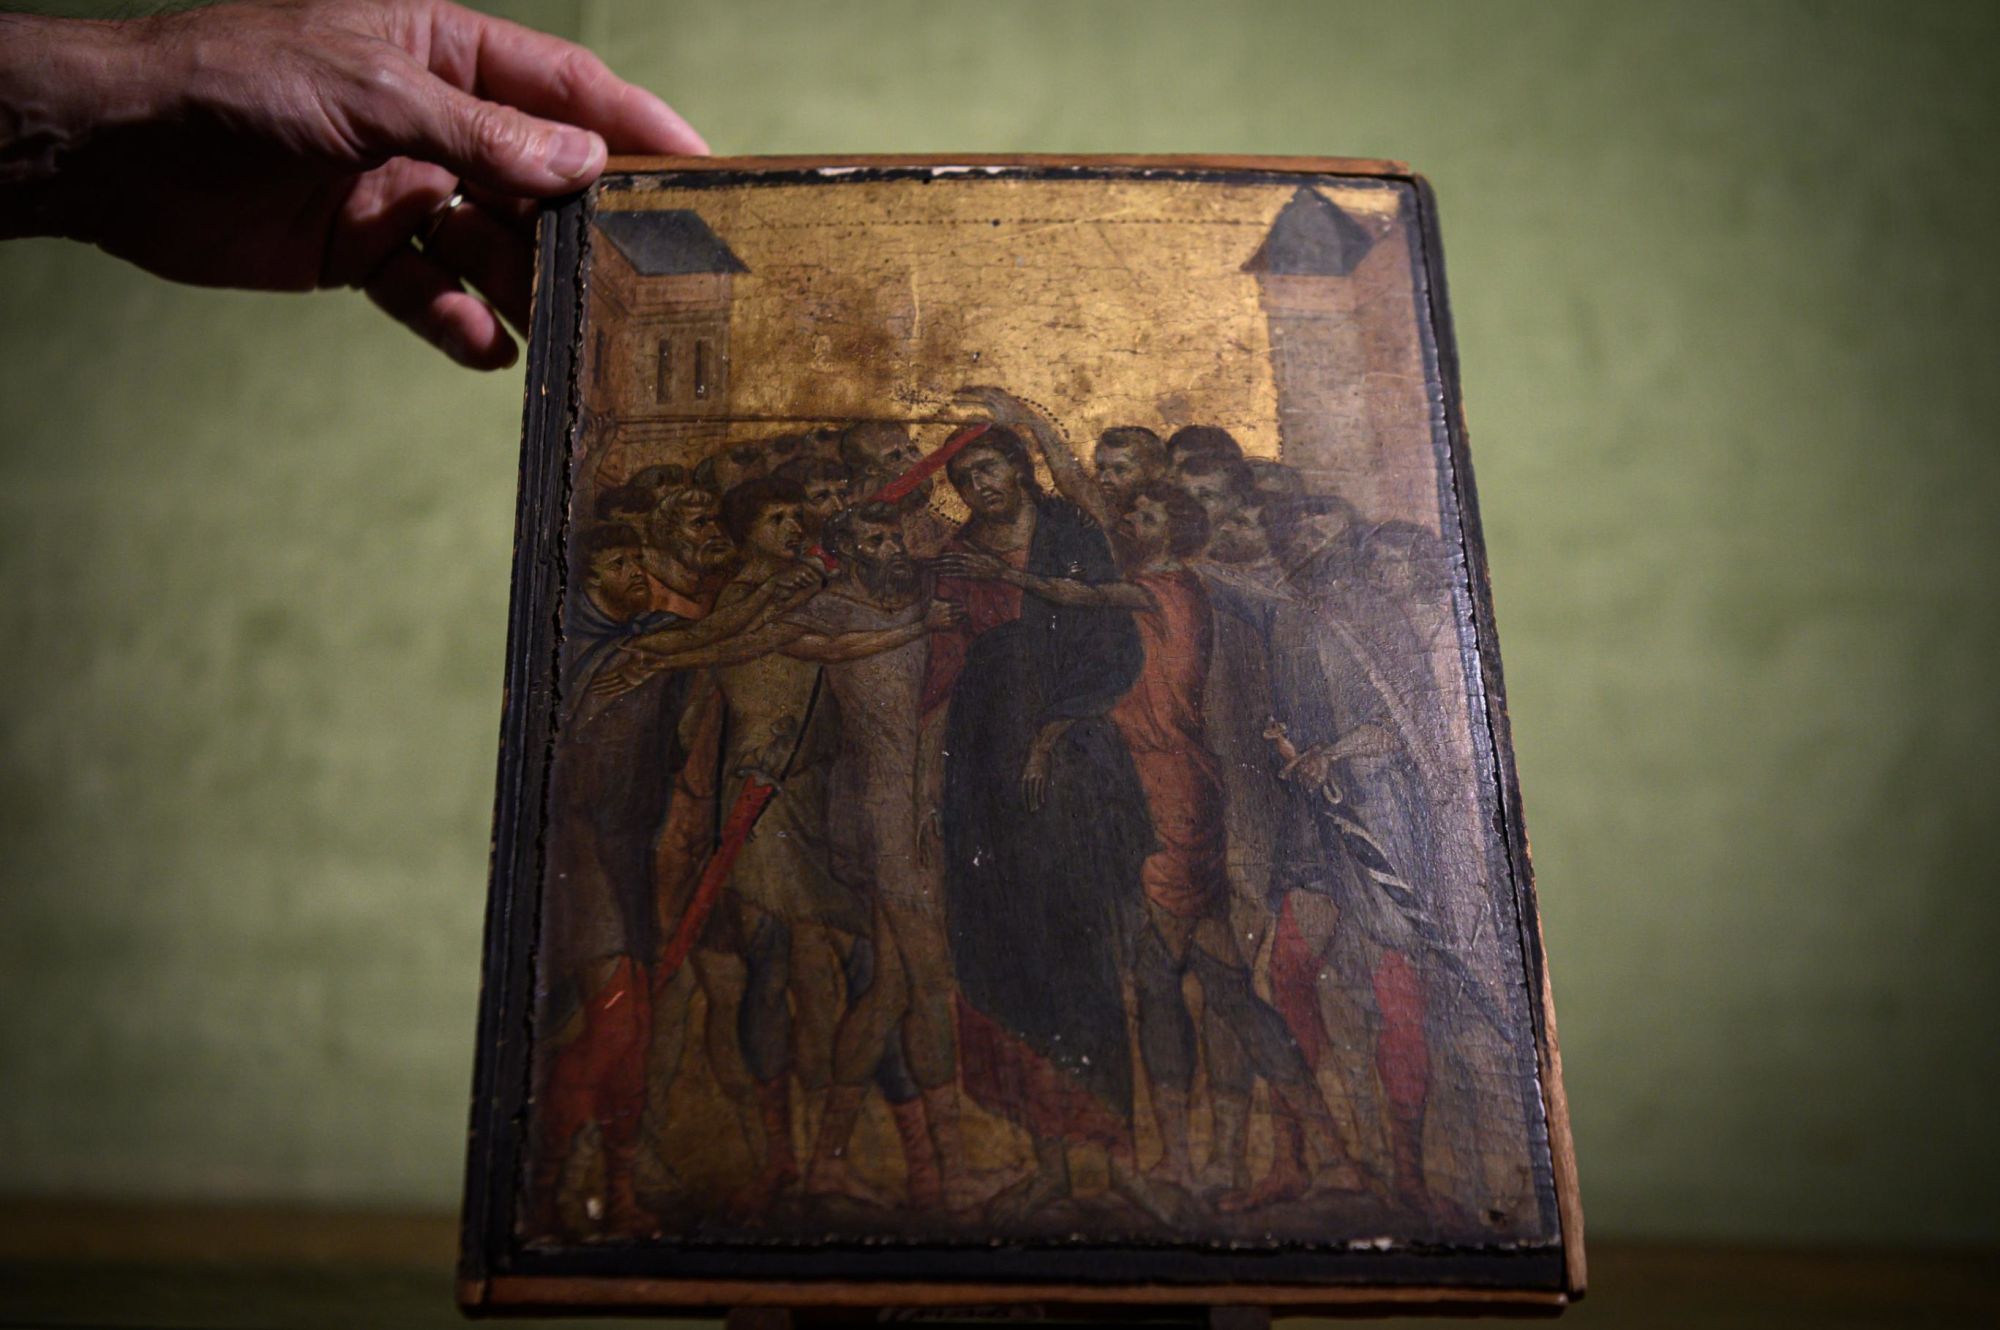 cimabue masterpiece discovered scli intl